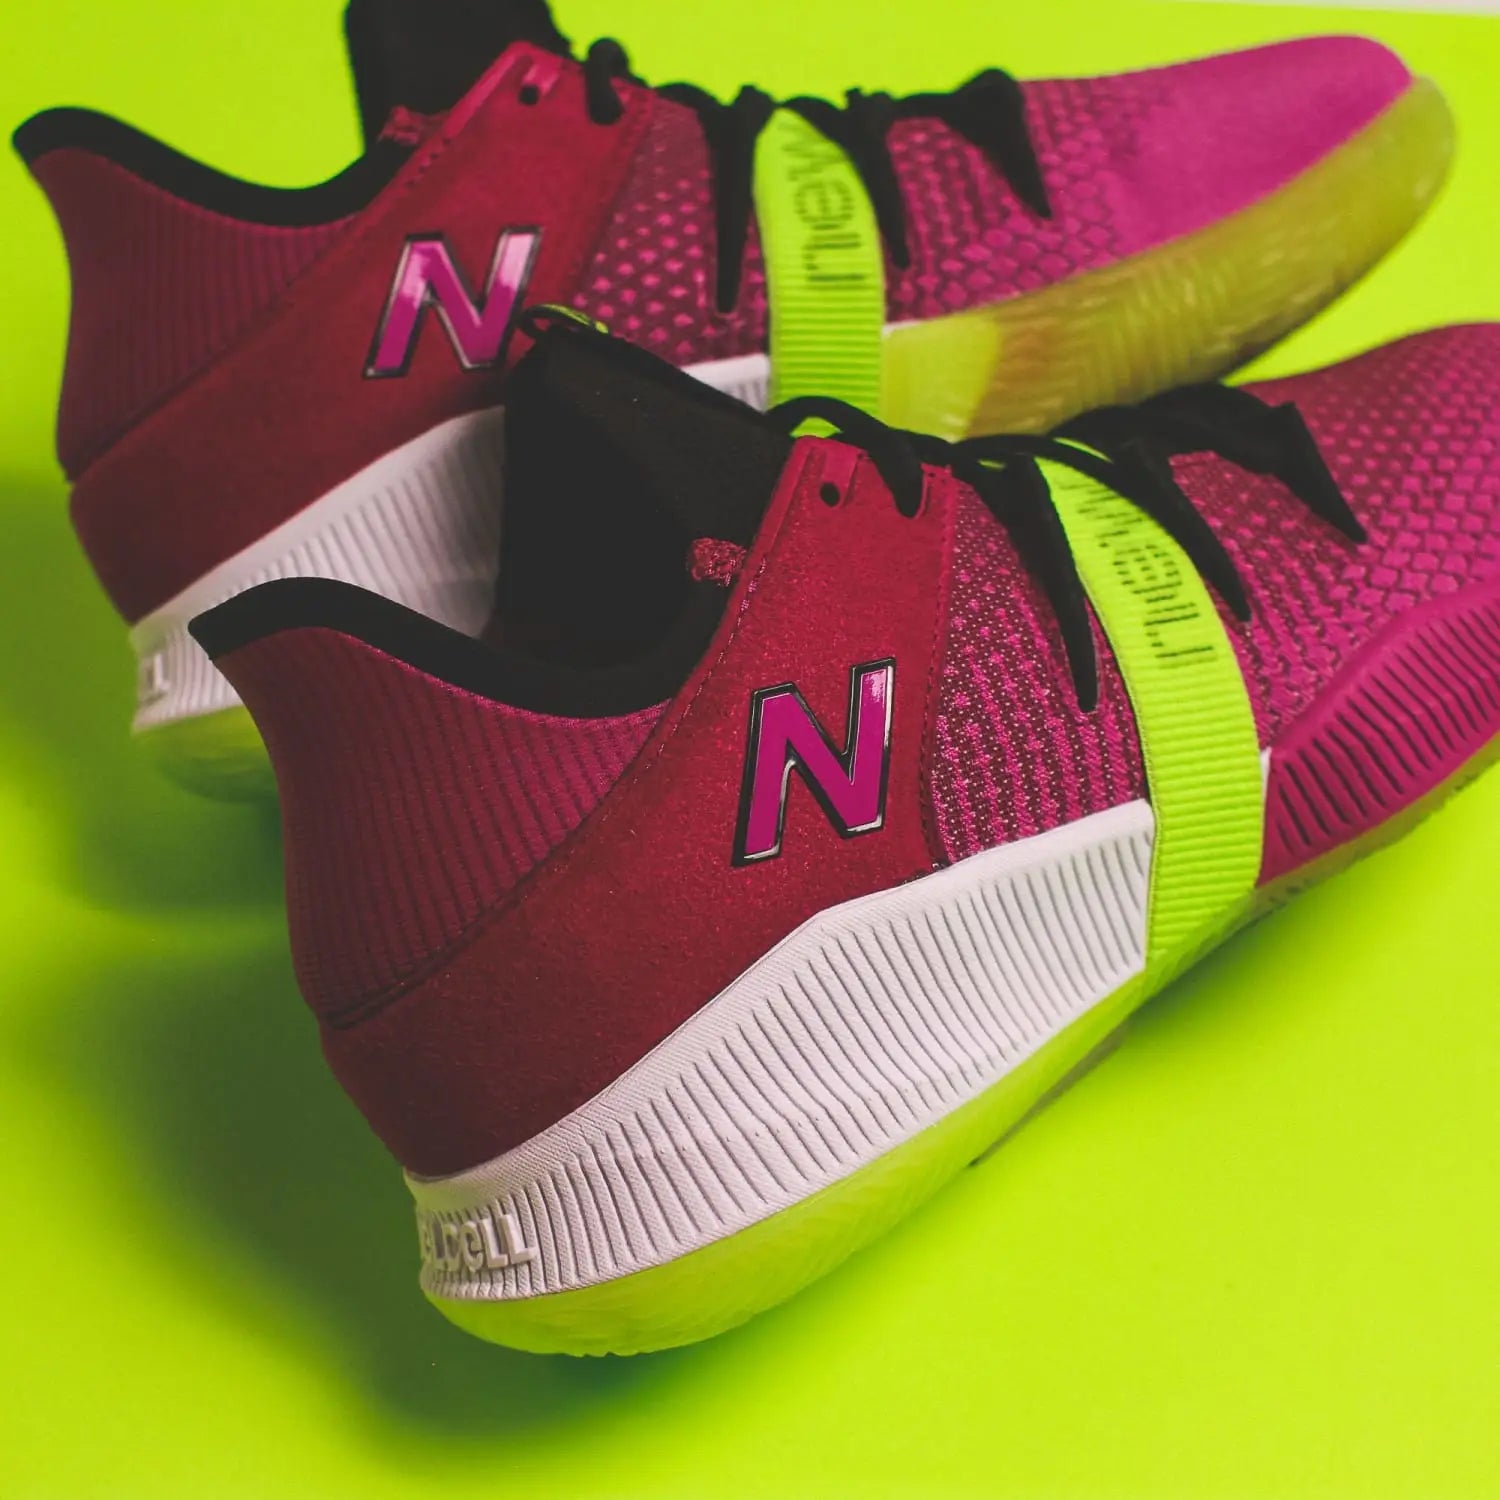 New Balance Basketball: The Berry Lime Collection